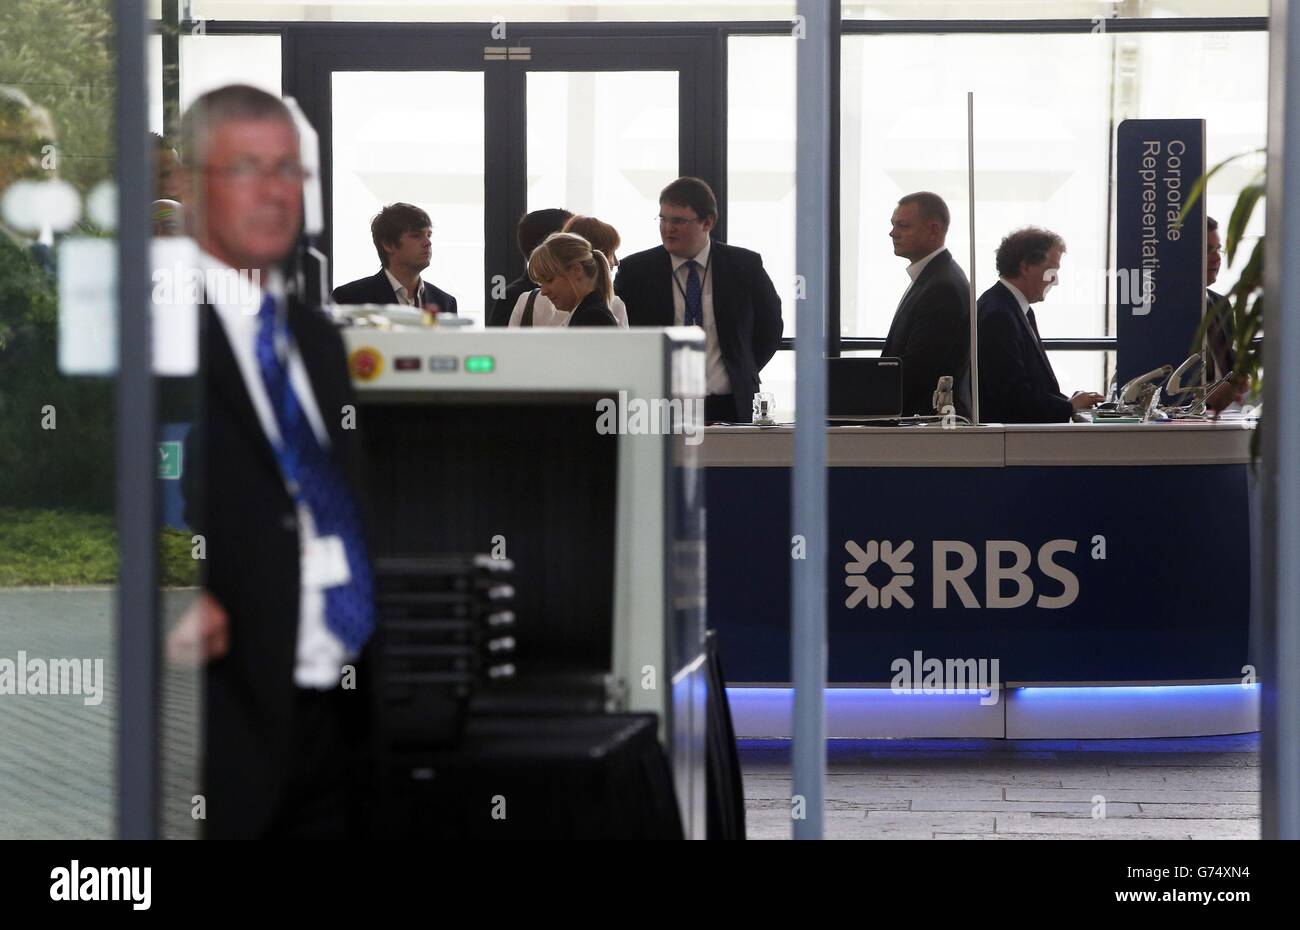 Security at the RBS (Royal Bank of Scotland) annual general meeting in Gogarburn, Scotland. Stock Photo